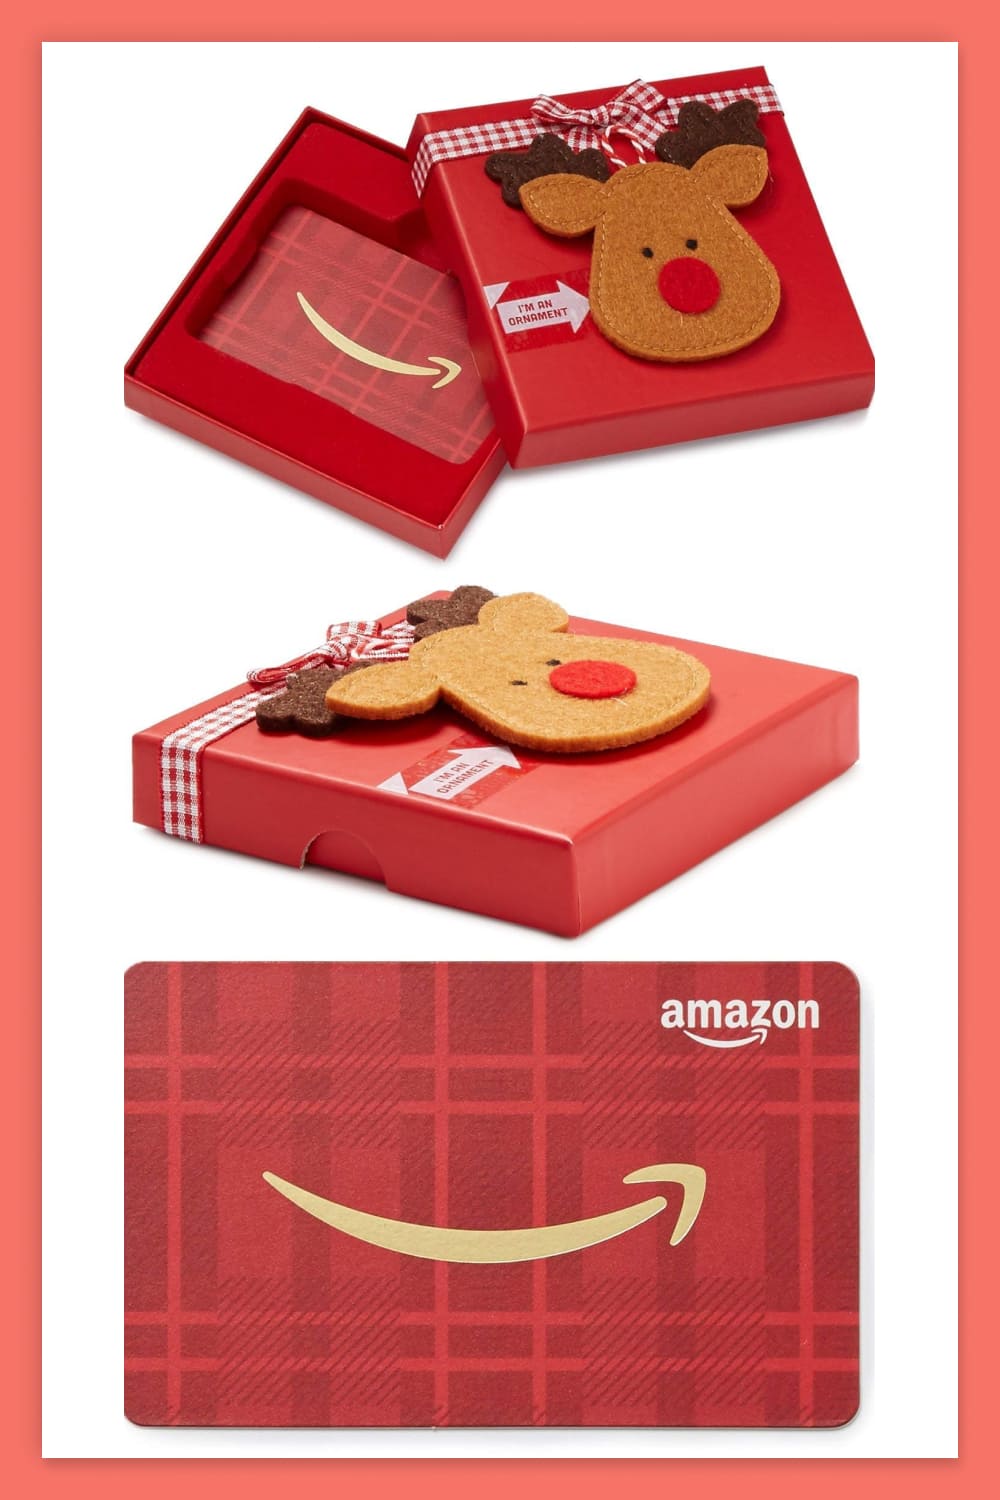 Red box collage with deer muzzle and gift card.